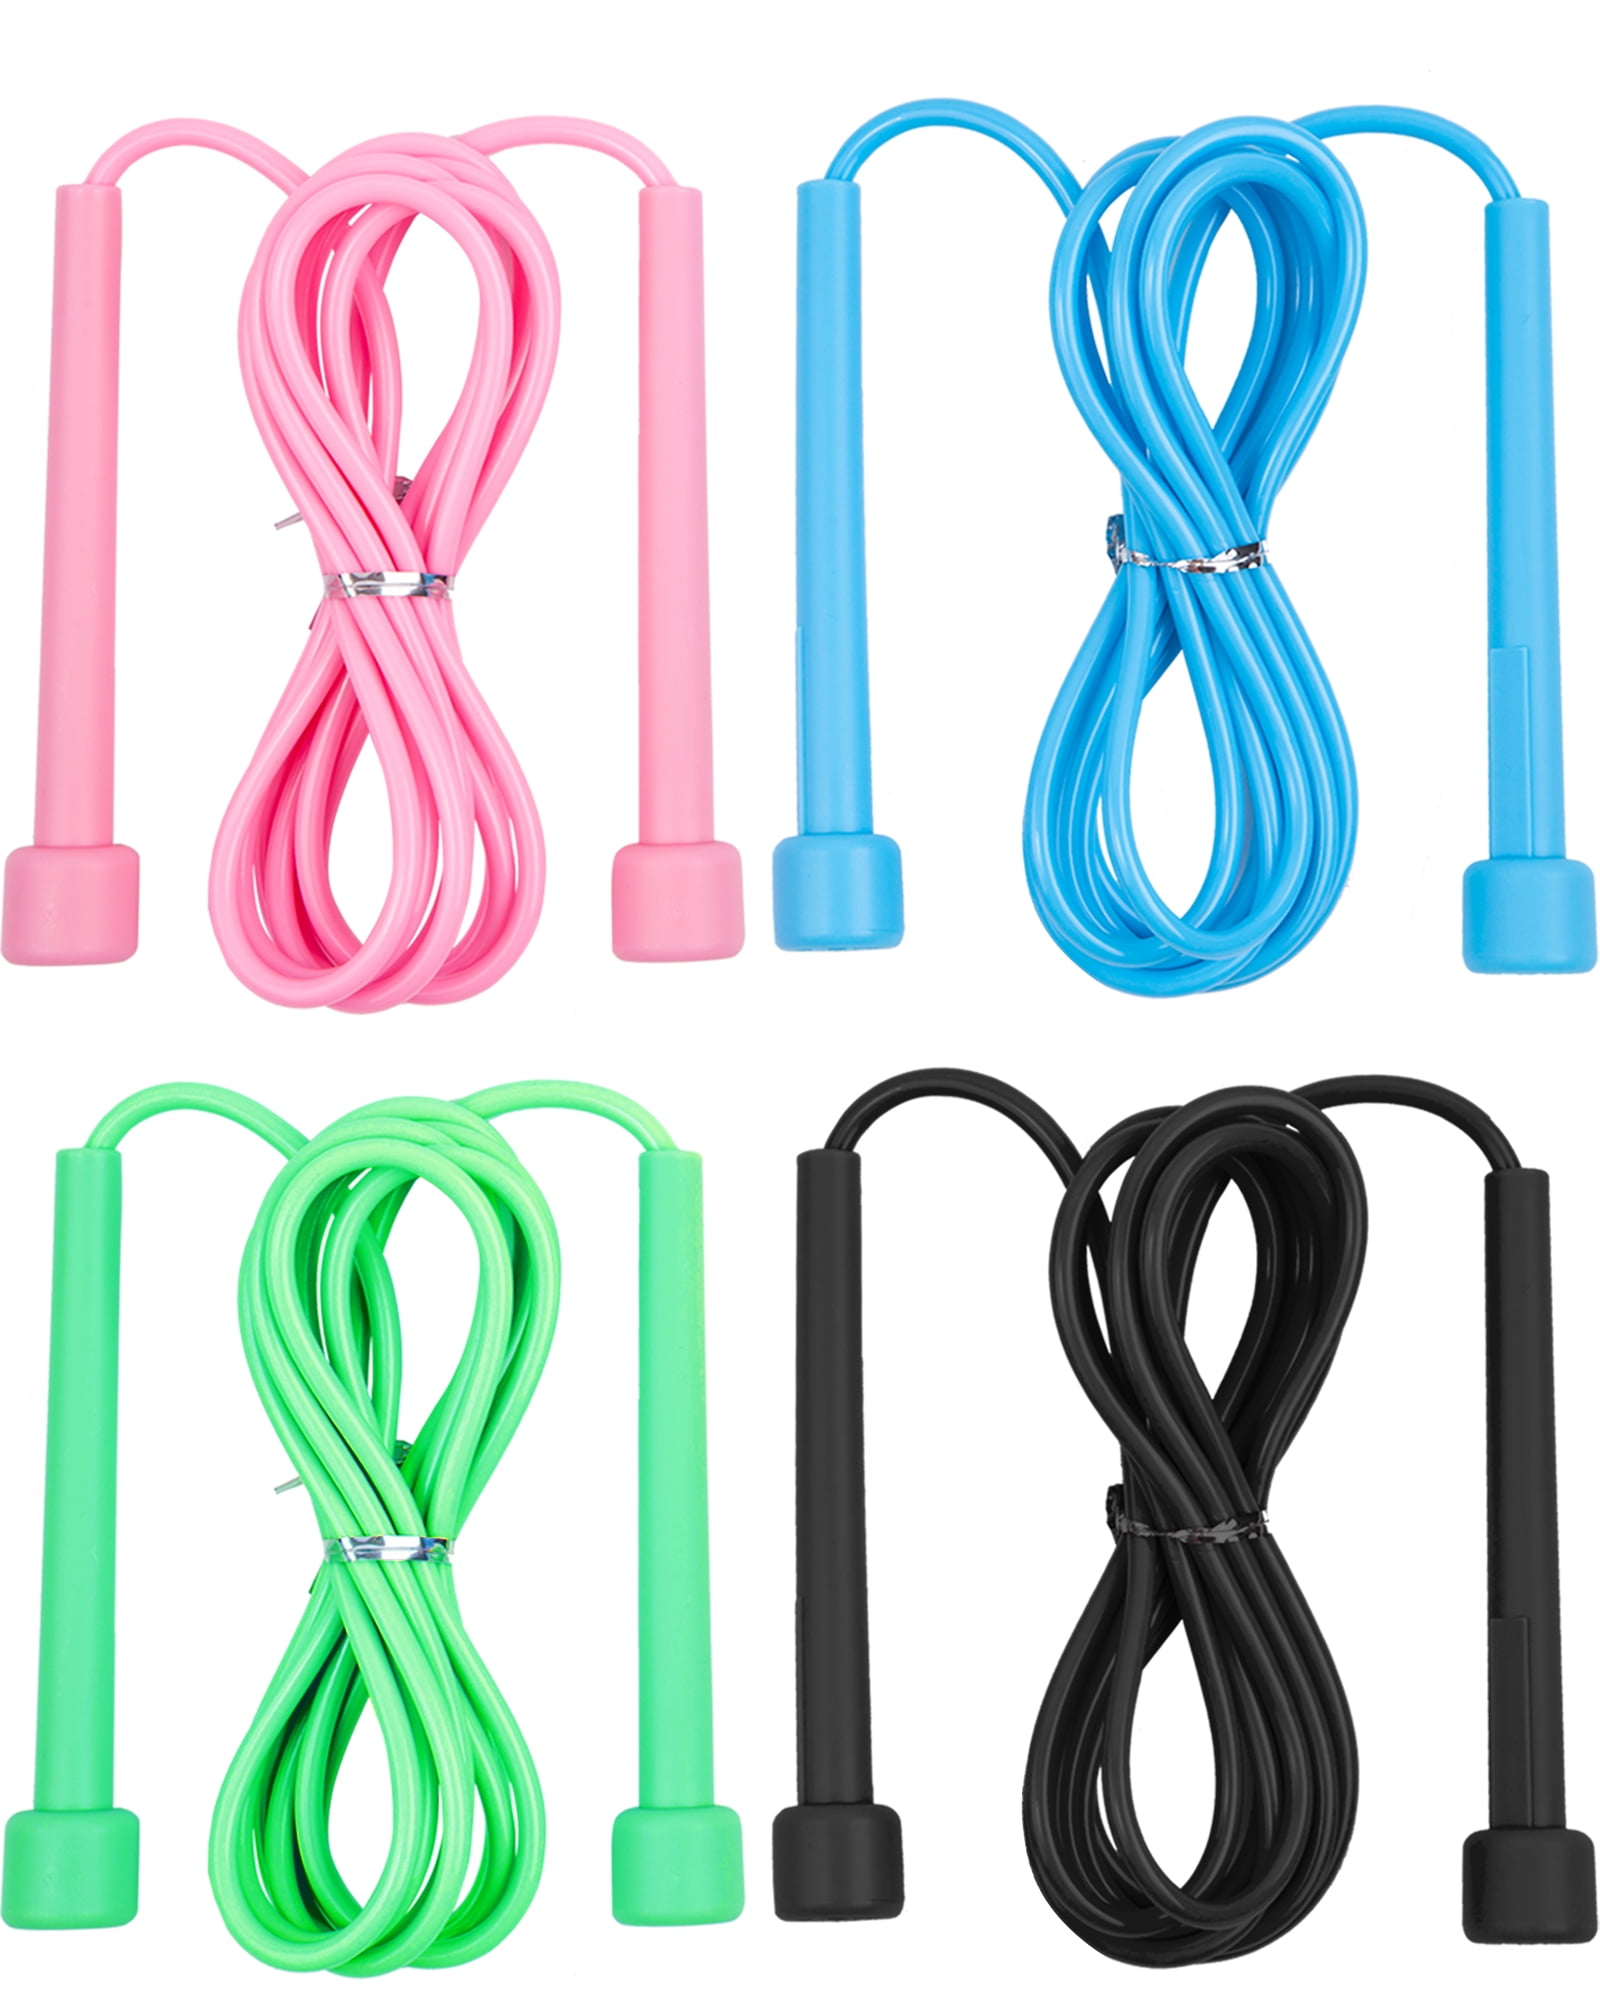 Women and Kids 2 Pack Jump Rope for Working Out Adjustable Jumping Rope with Latex Workout Bands for Men Tangle-Free Skipping Ropes with 5 Pcs Resistance Loop Bands for Fitness 